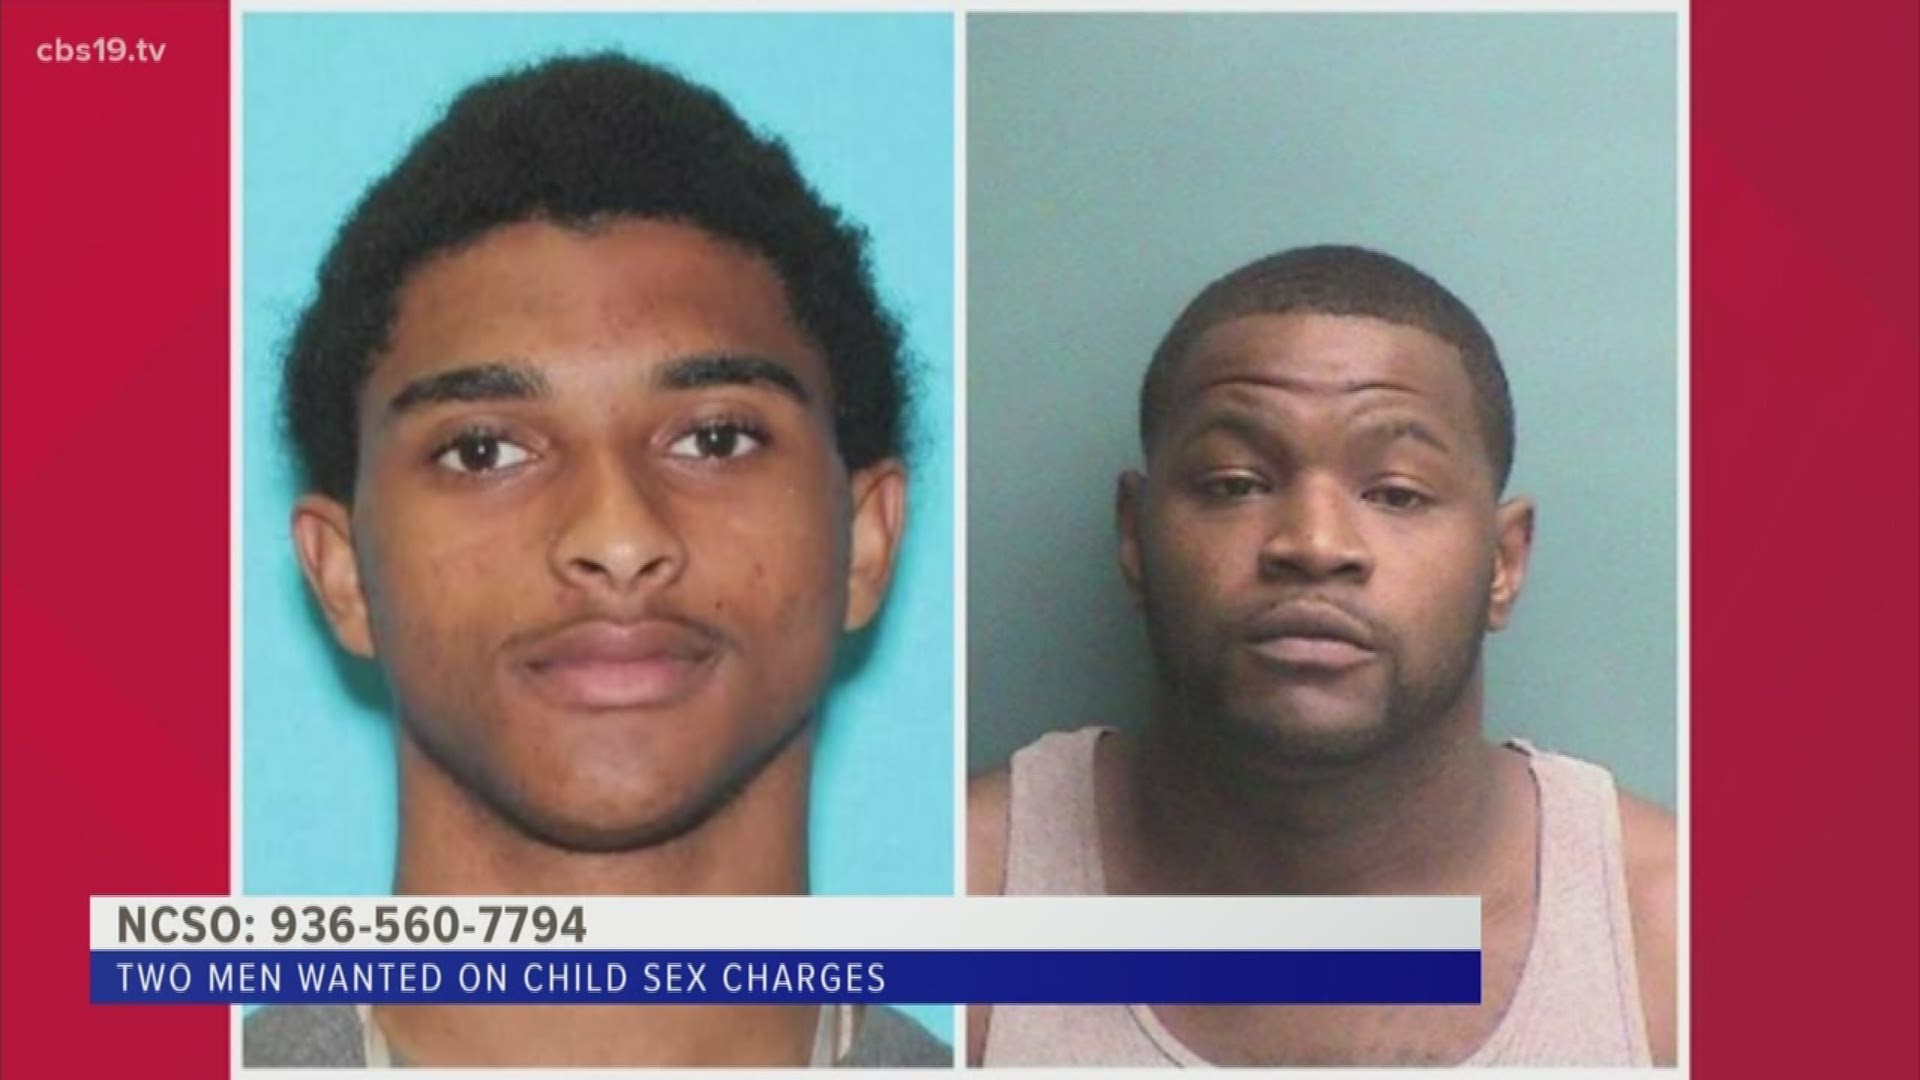 Both suspects are wanted on child sex charges.